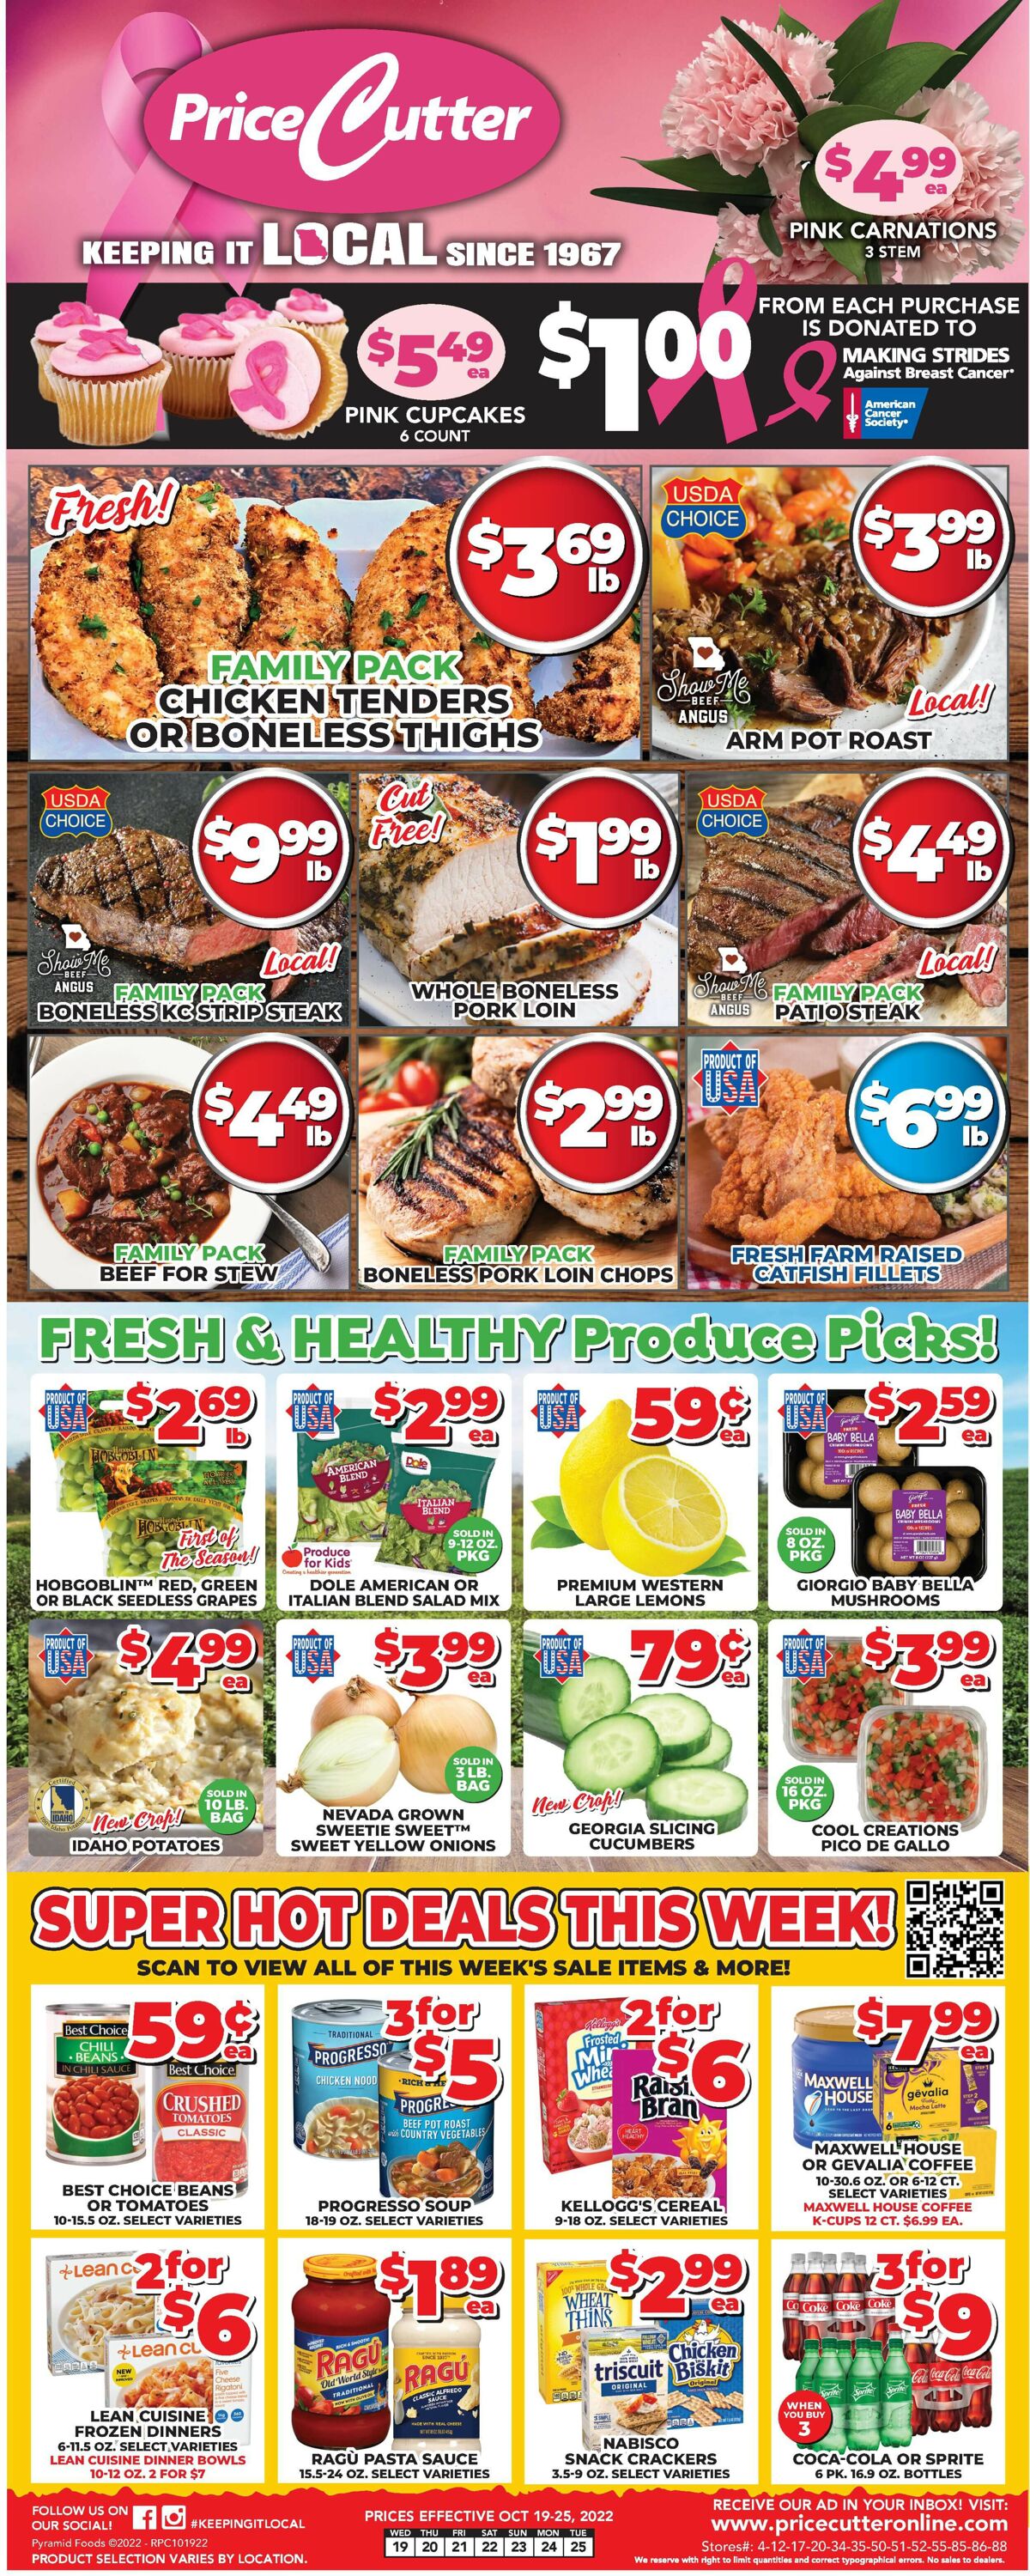 Price Cutter Weekly Ad Circular - valid 10/19-10/25/2022